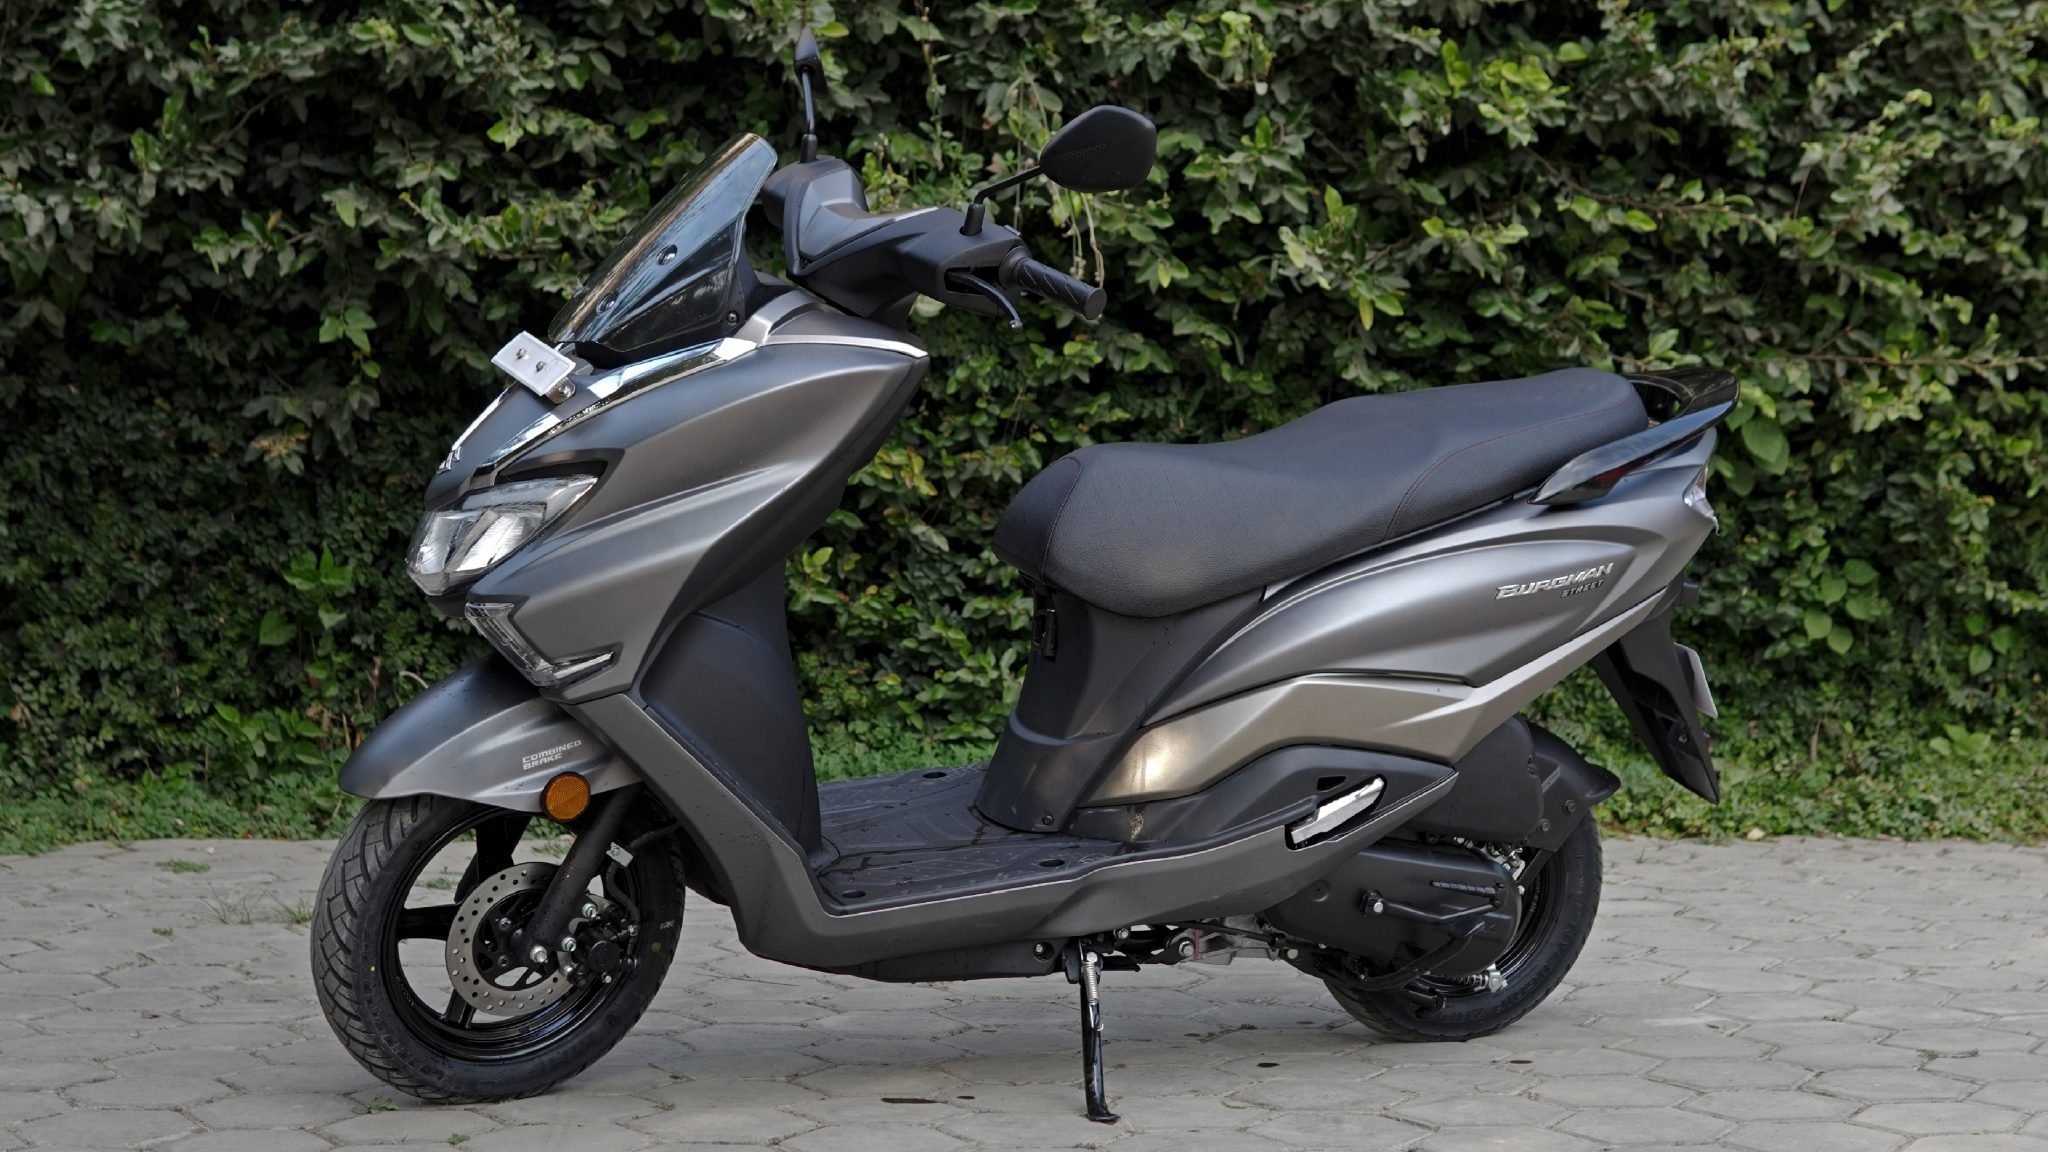 Suzuki Burgman Street 125 Review Offers More Features for